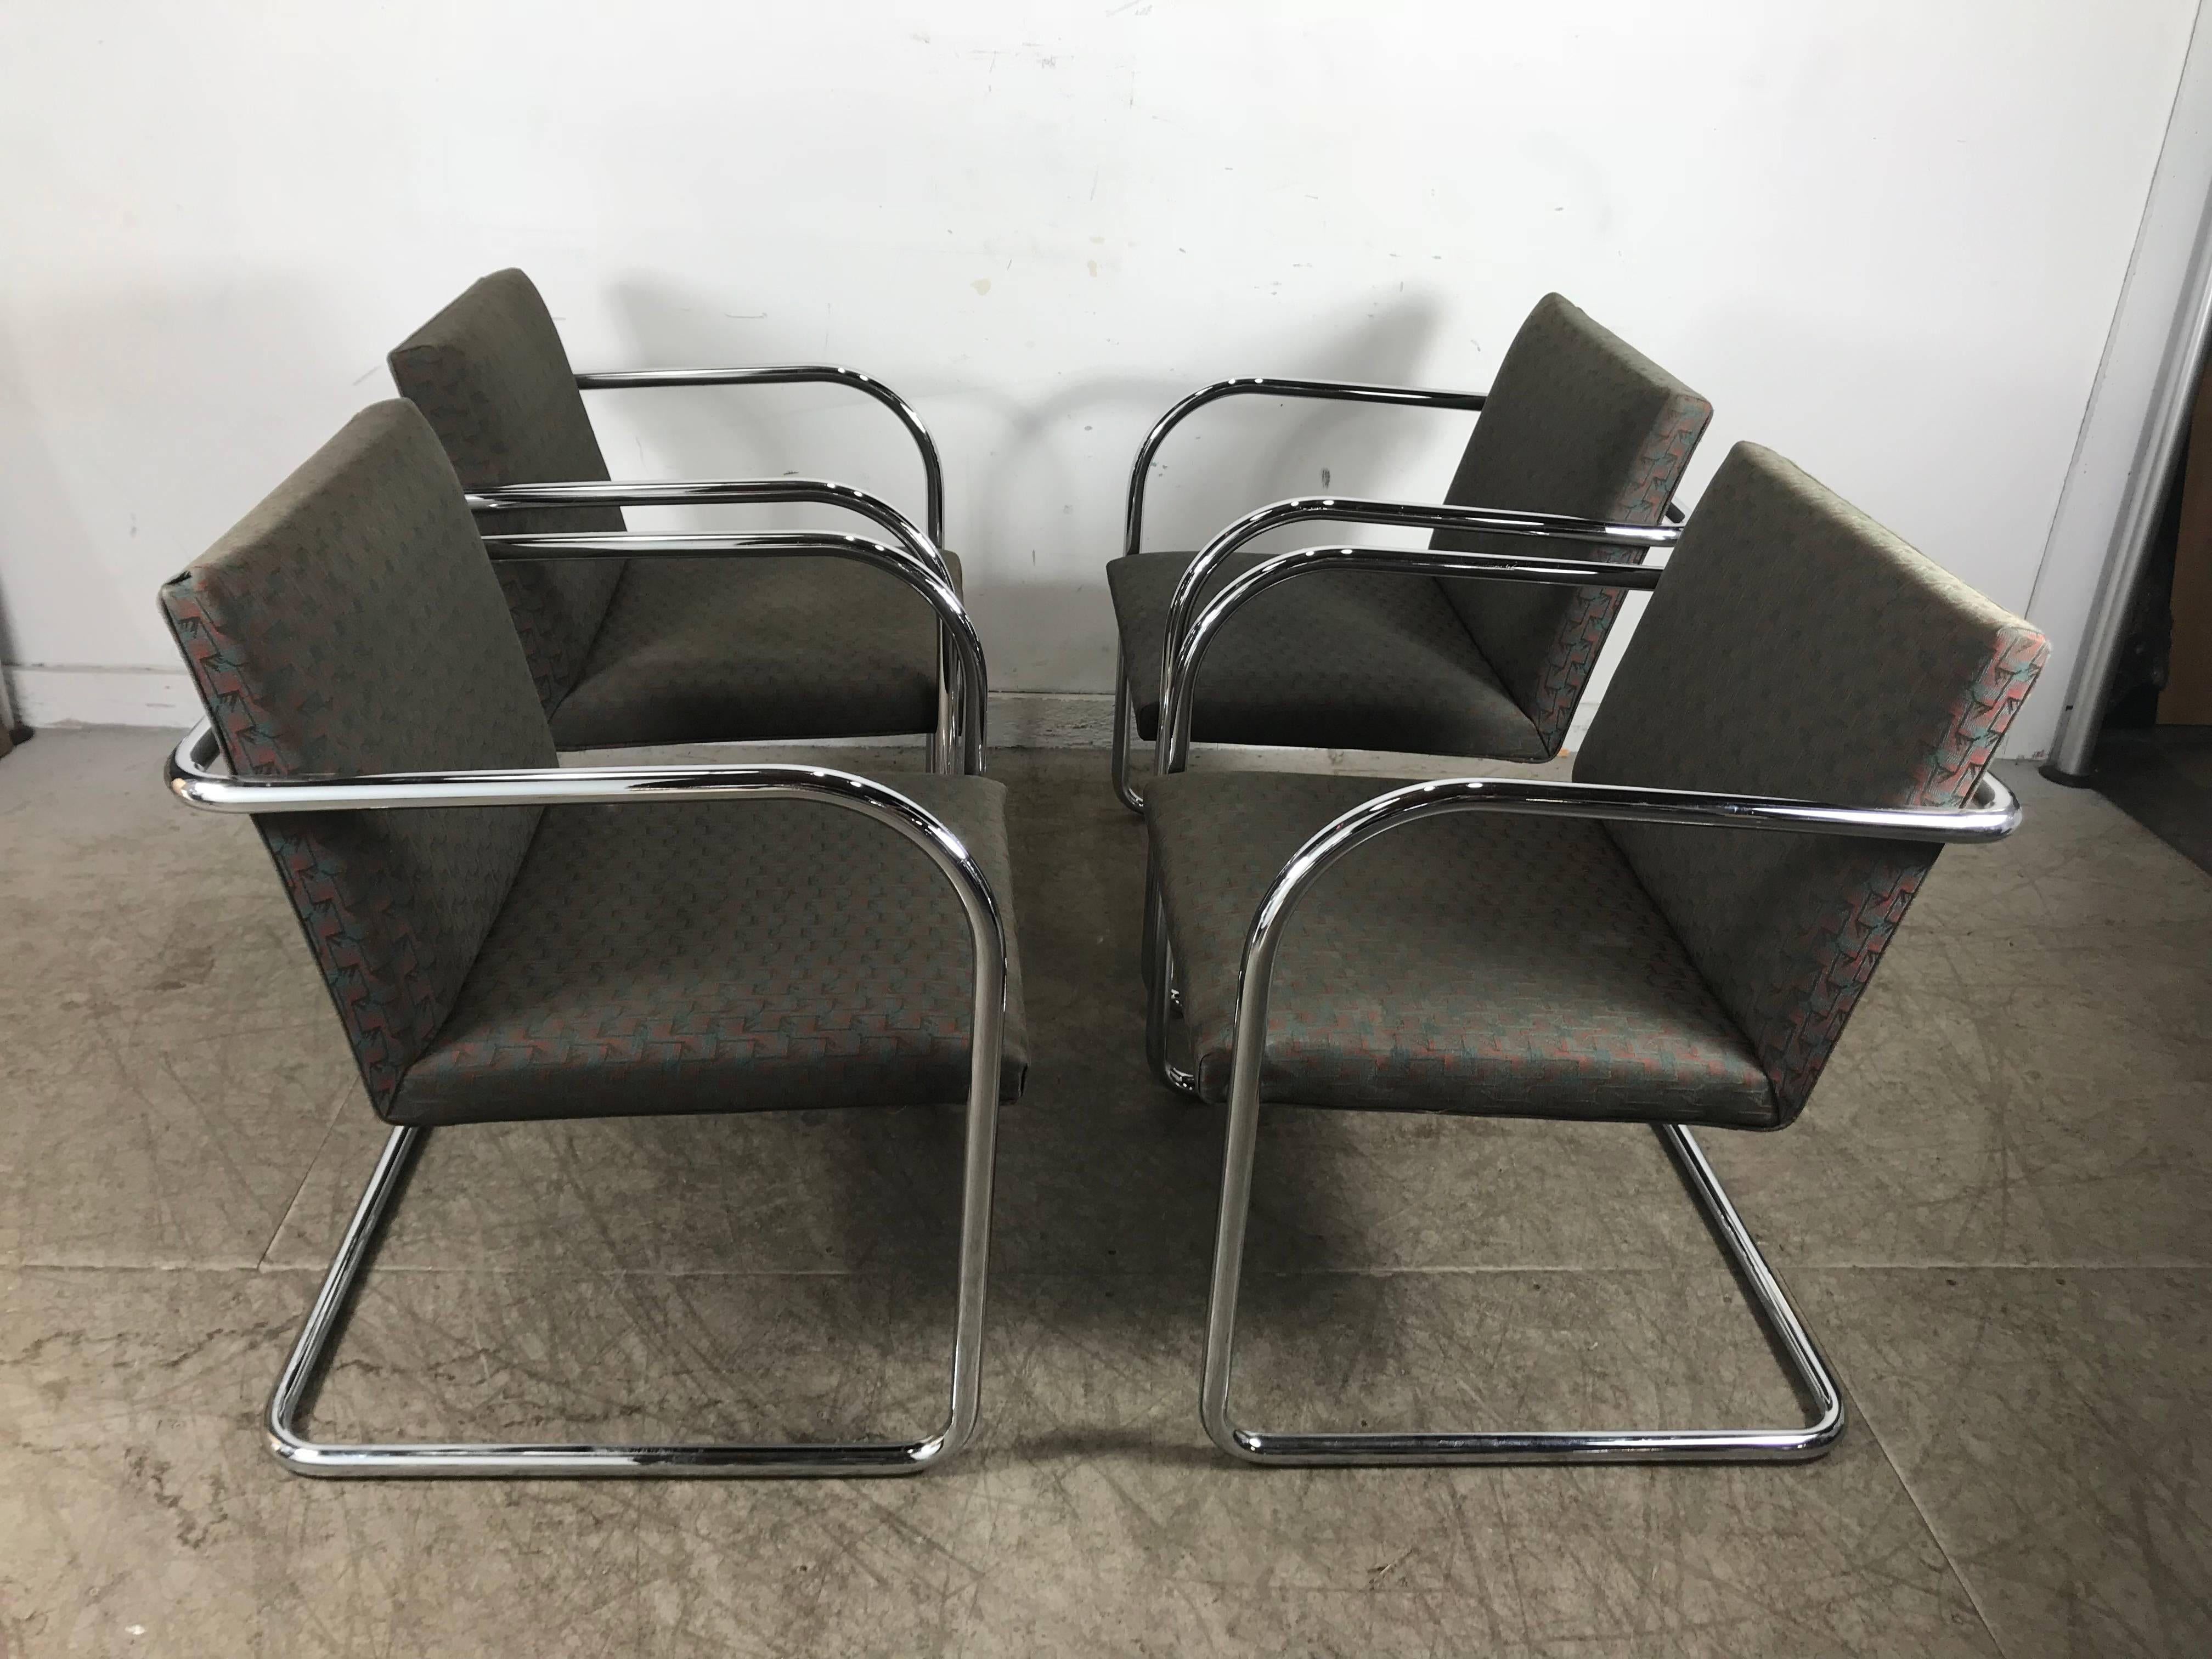 Set of eight chrome Brno chairs by Mies Van Der Rohe for Thonet, classic Bauhaus design, nice original condition, hand delivery avail to New York City or anywhere en route from Buffalo NY.